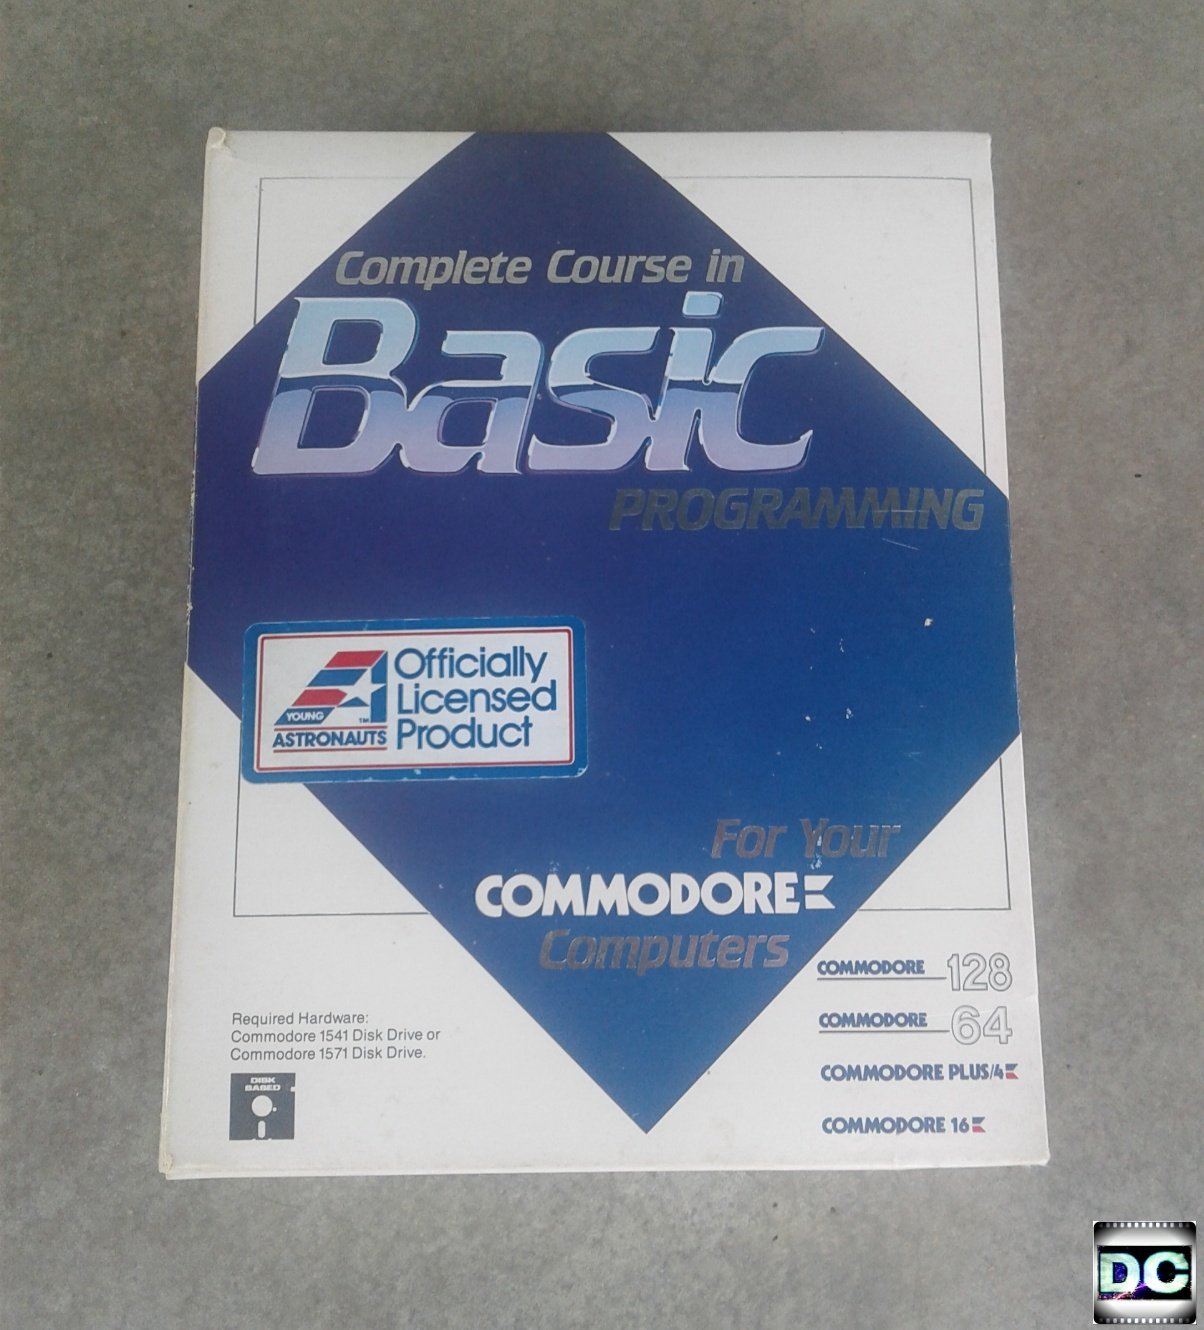 Commodore 64/128 Basic Programming Complete Vintage Computer User Manual Guide + Software Disks C64